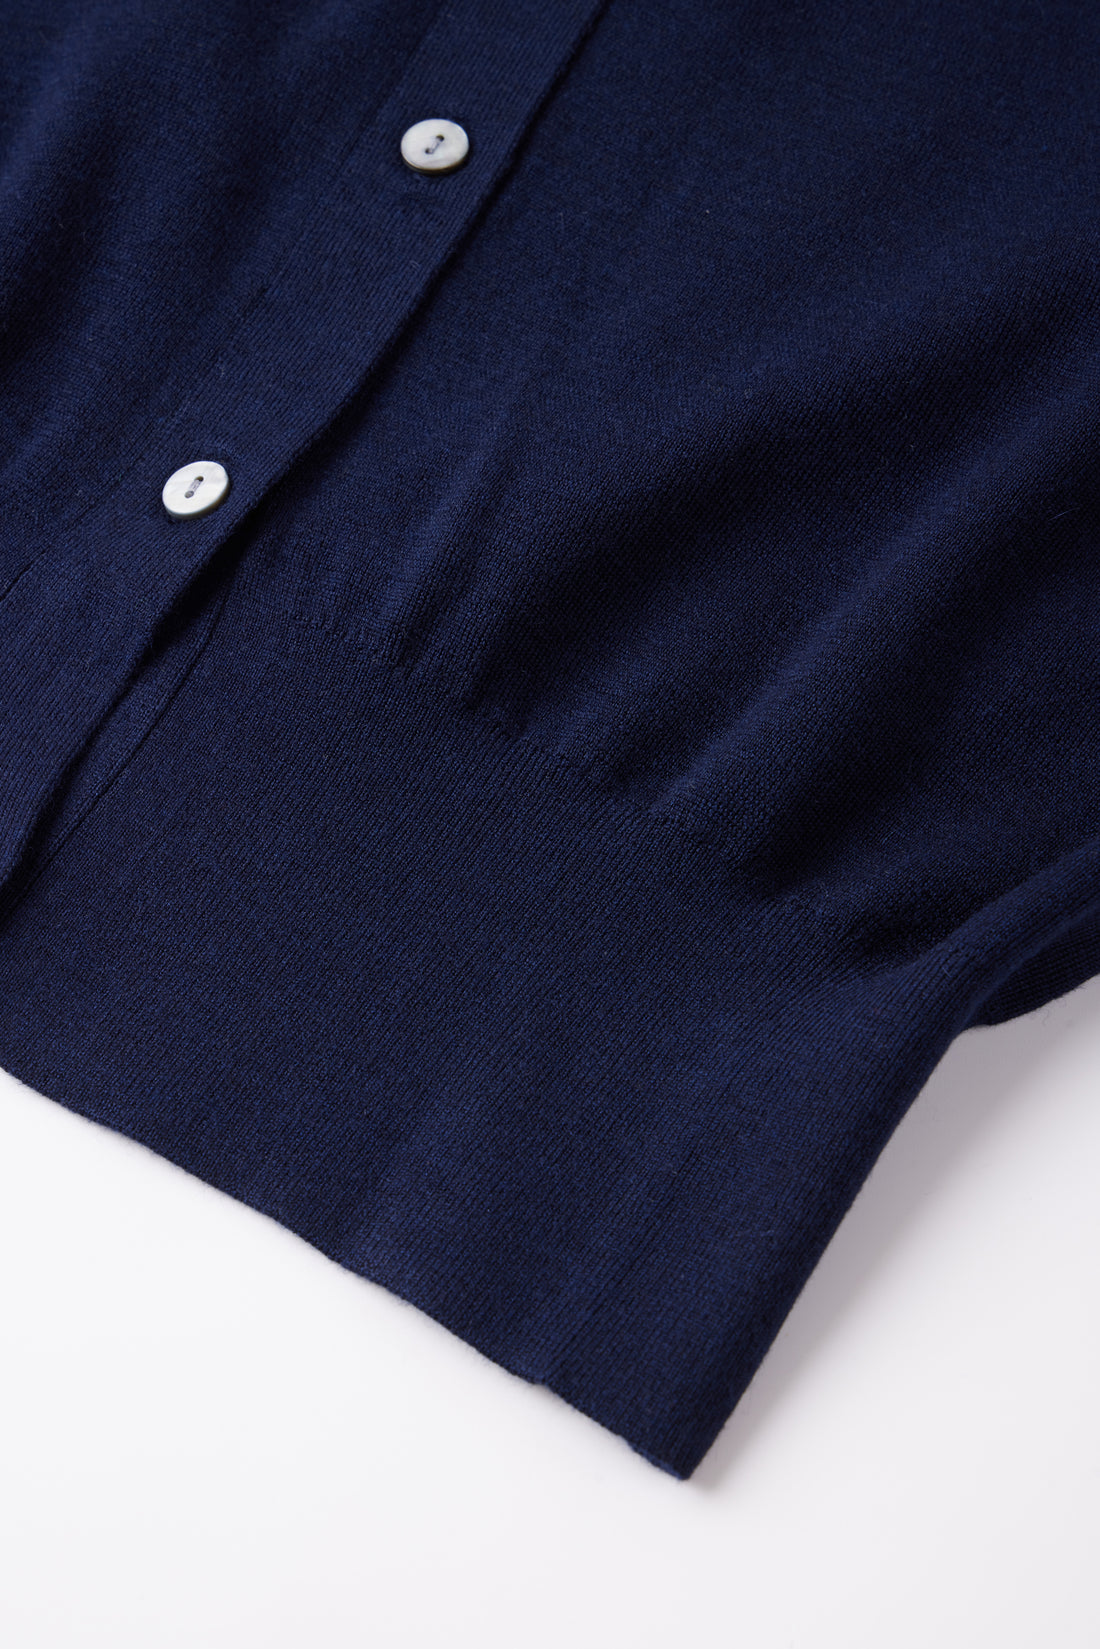 DELUXE silk-cashmere blended polo sweater (Navy)